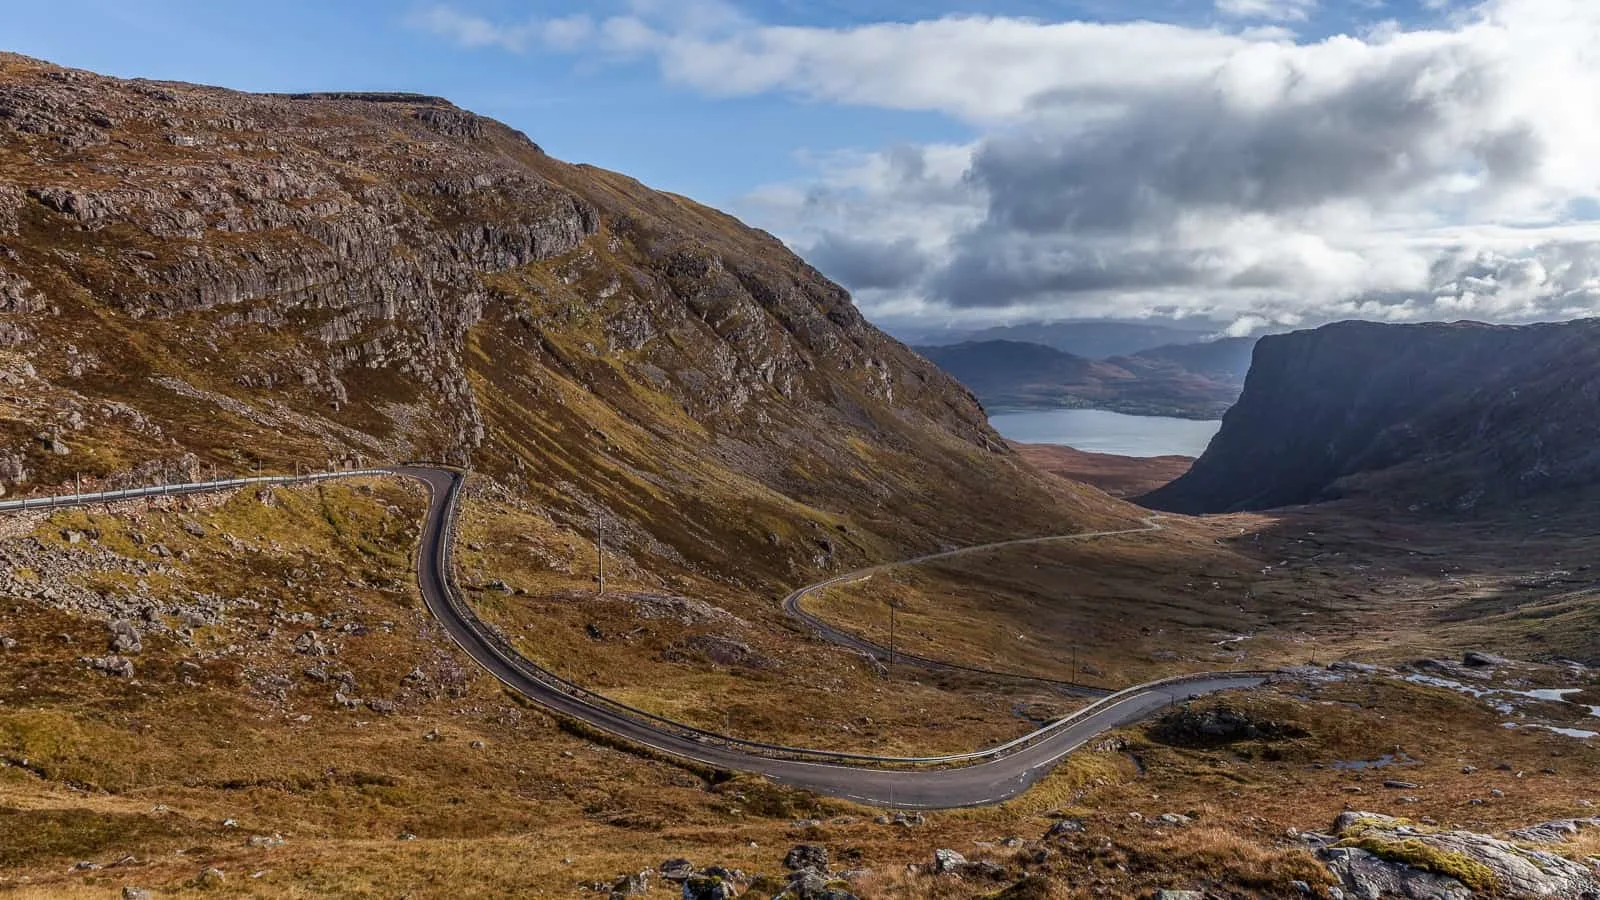 Discover 10 of the best European road trips you must add to your bucket list. From the wild rugged beauty of the NC500 in Scotland to the balmy Croatian coastline. #Roadtrip Read the full article here: http:mowgli-adventures.com/best-european-road-trips/